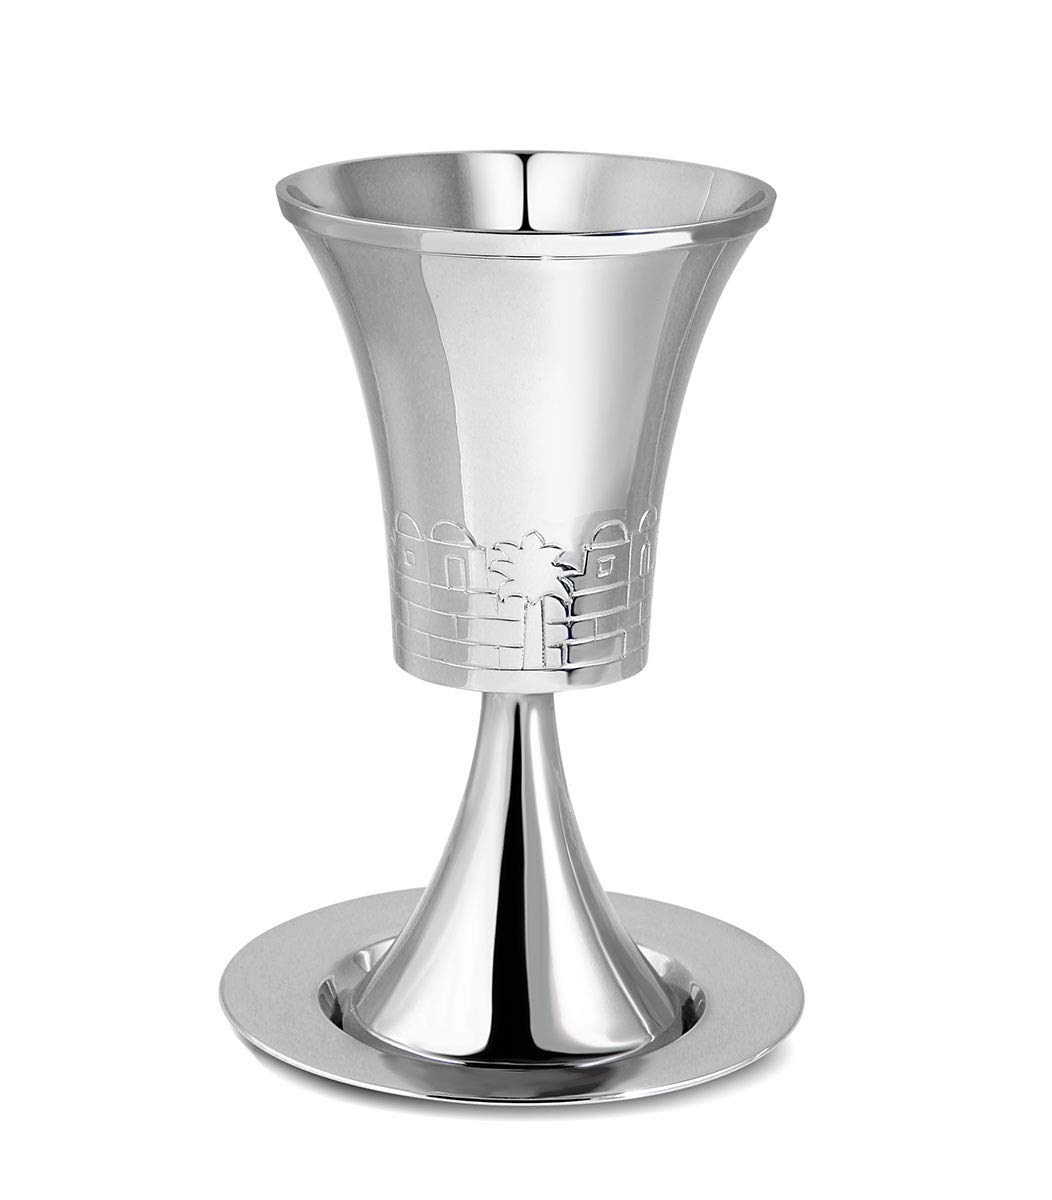 High Polished Passover Seder Elijah's Cup with Tray 7.5'' Tall Etched Jerusalem Pattern Kos Shel Eliyahu - Non Tarnish 12.5 oz Wine Cup of Redemption Pesach Dinnerware Collection by Zion Judaica